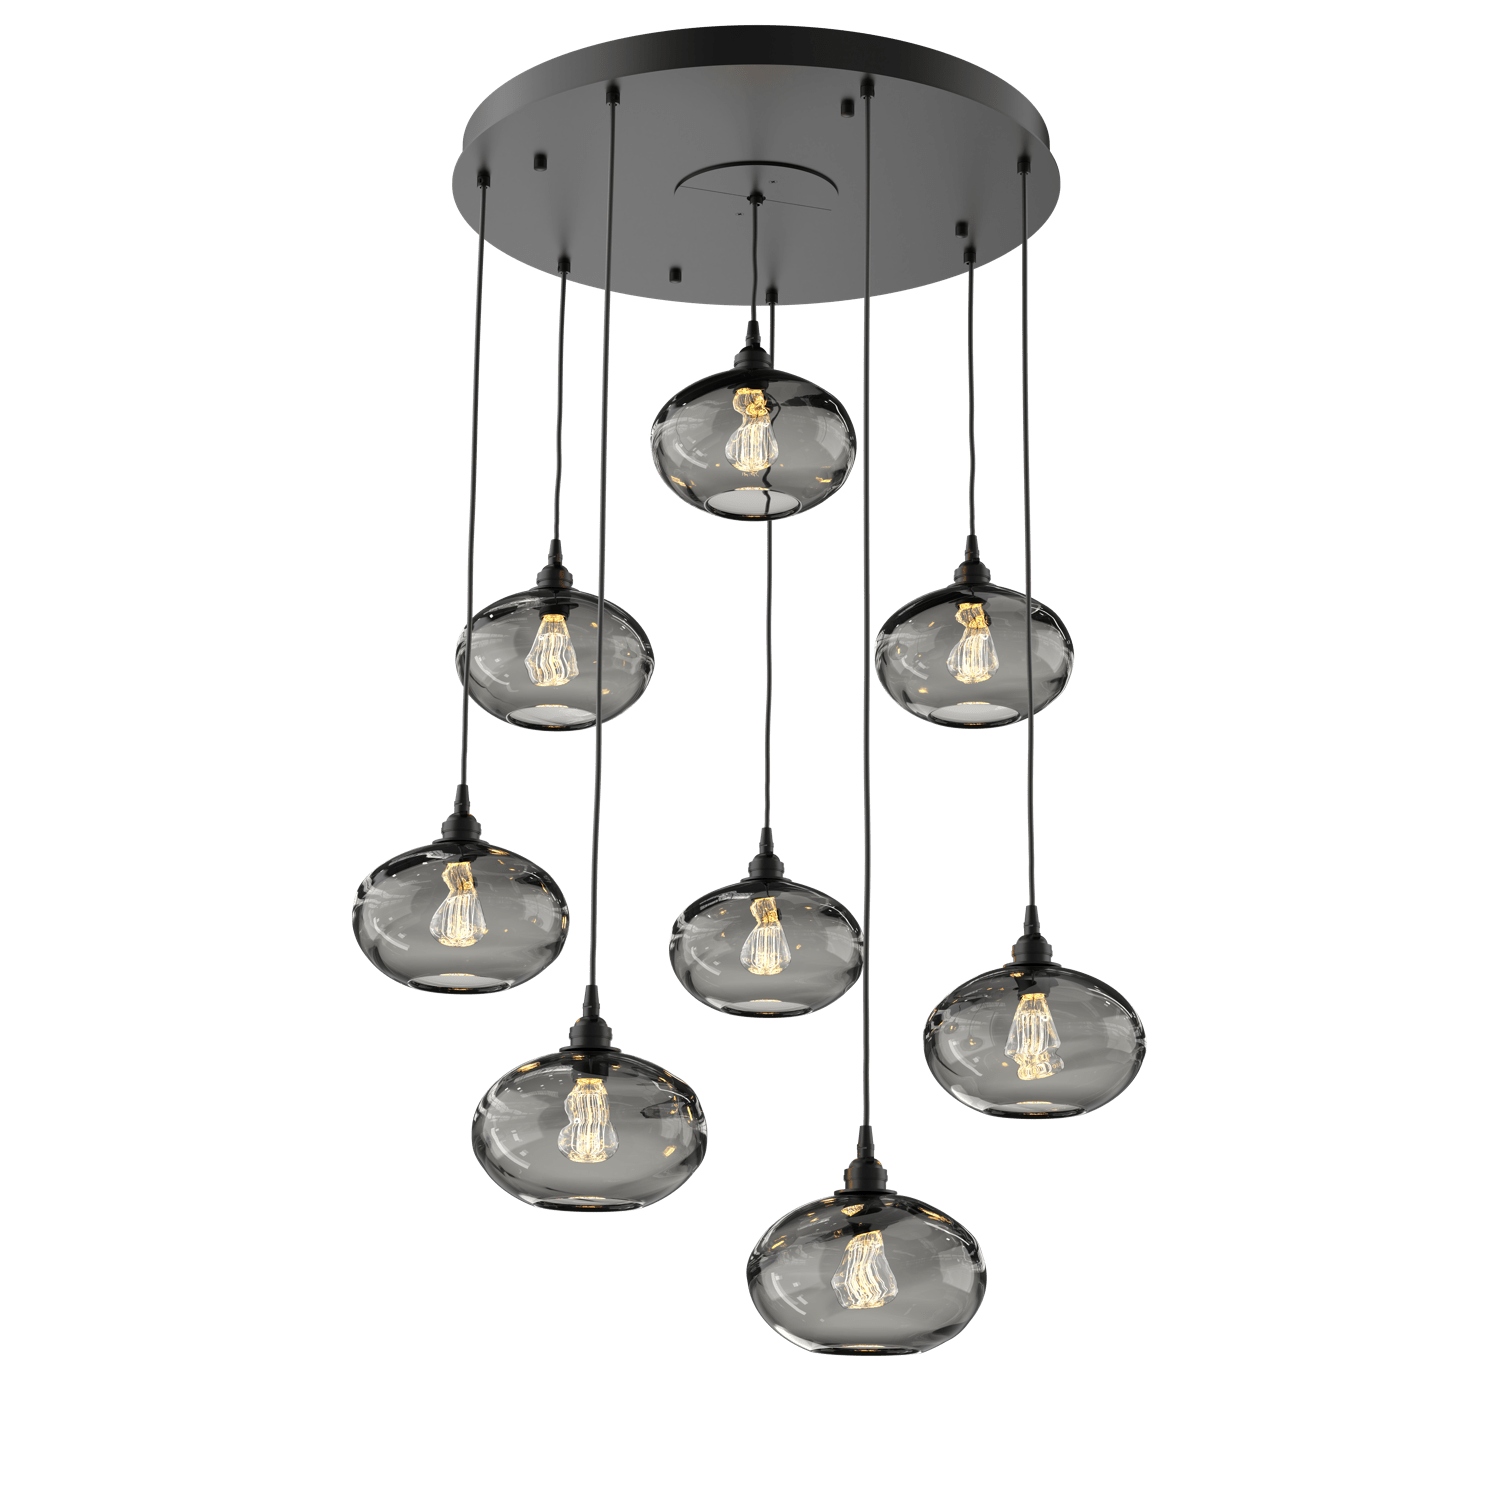 CHB0036-08-MB-OS-Hammerton-Studio-Optic-Blown-Glass-Coppa-8-light-round-pendant-chandelier-with-matte-black-finish-and-optic-smoke-blown-glass-shades-and-incandescent-lamping